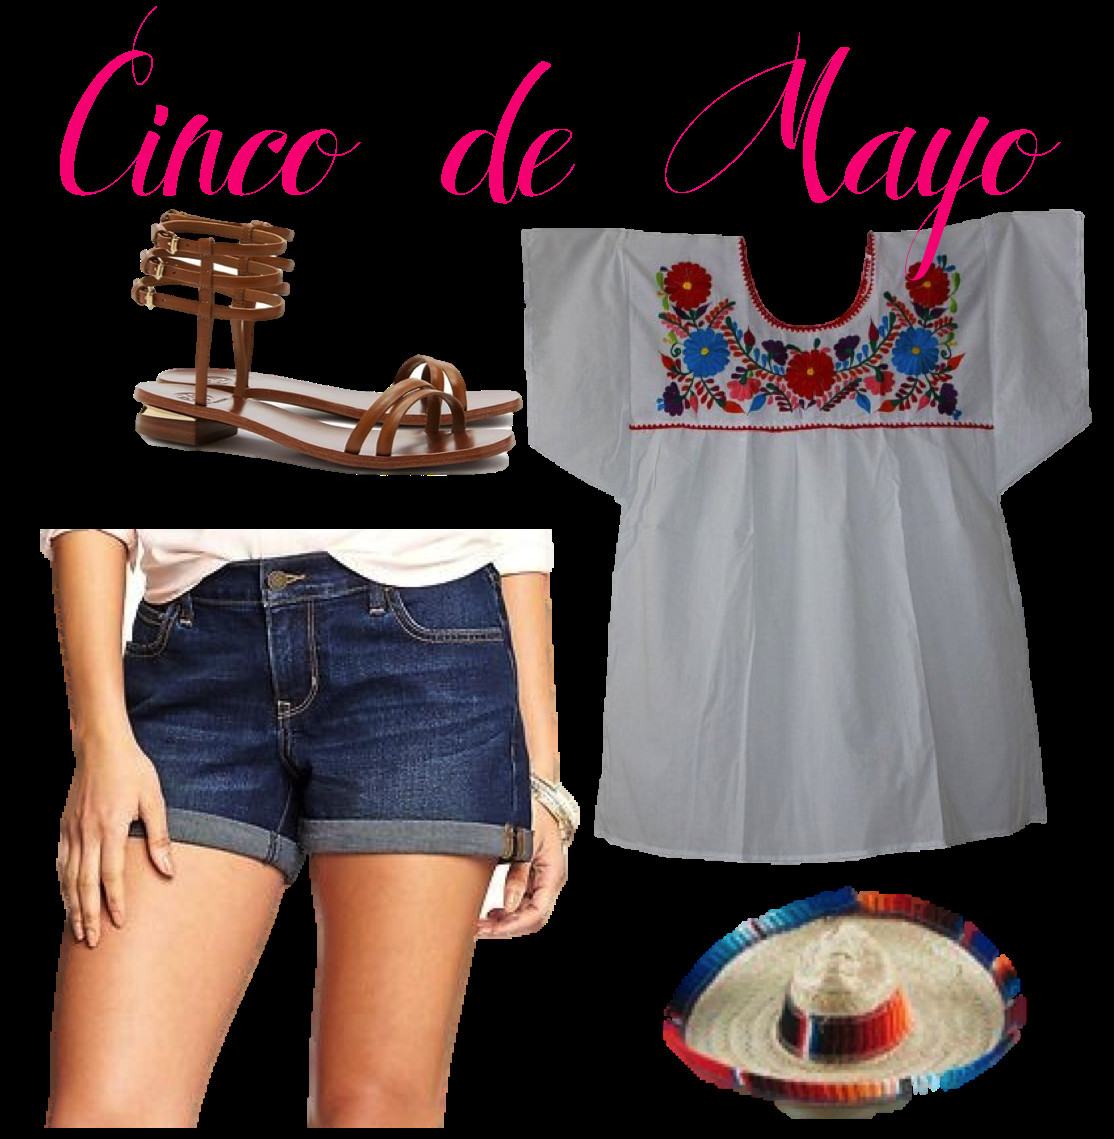 Cinco De Mayo Party Outfit
 Prep In Your Step Cinco de Mayo Outfit Inspiration